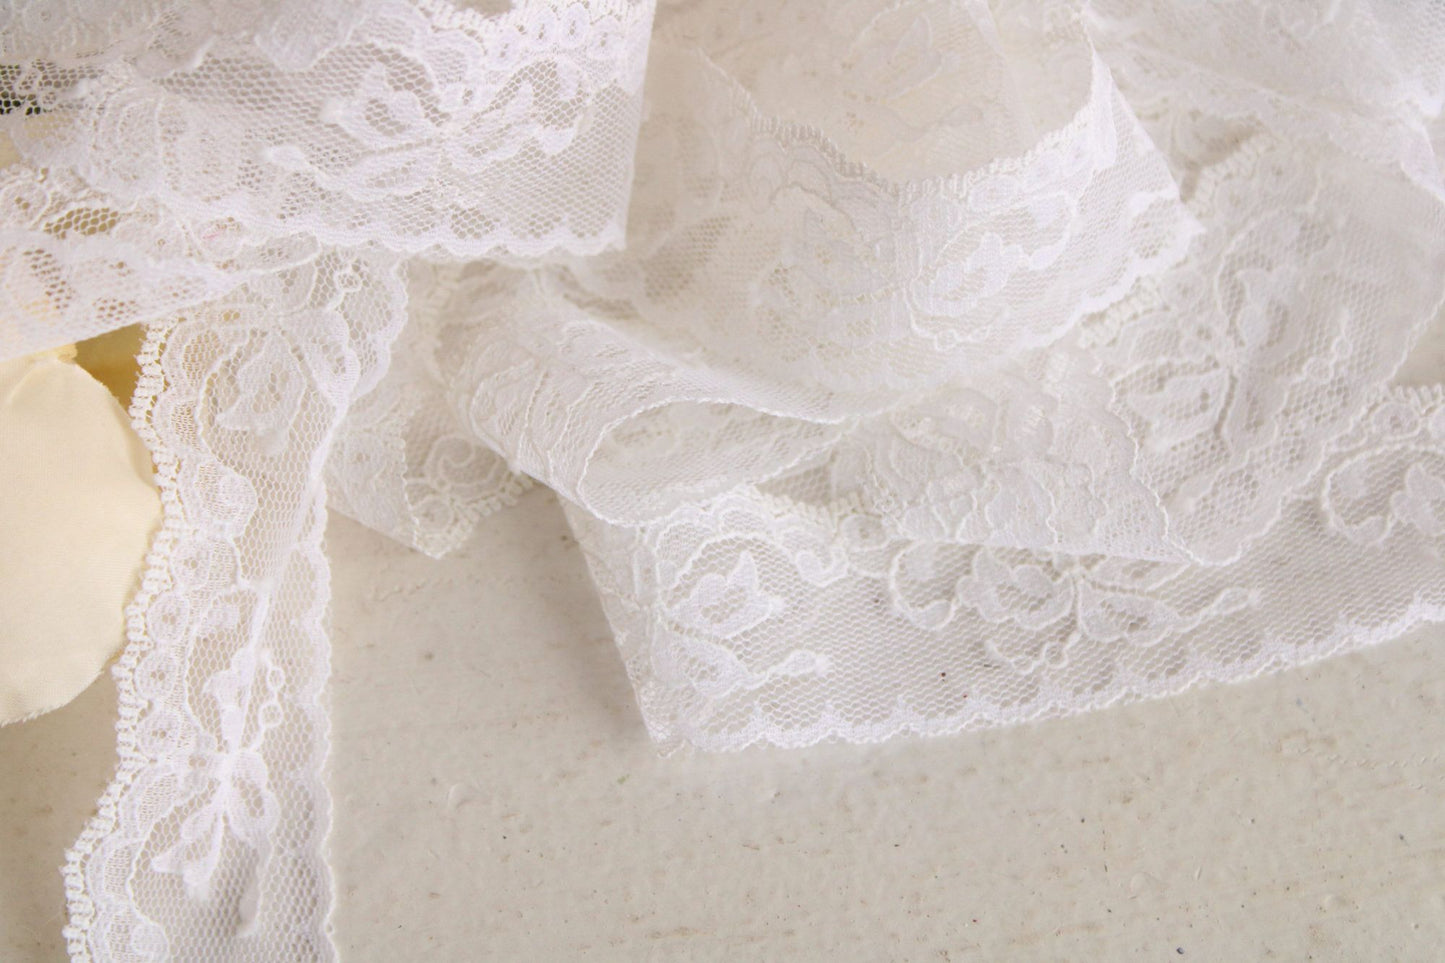 Vintage White Lace Trim, 3 Yards, 1.25" wide, Nylon, Sewing Supply